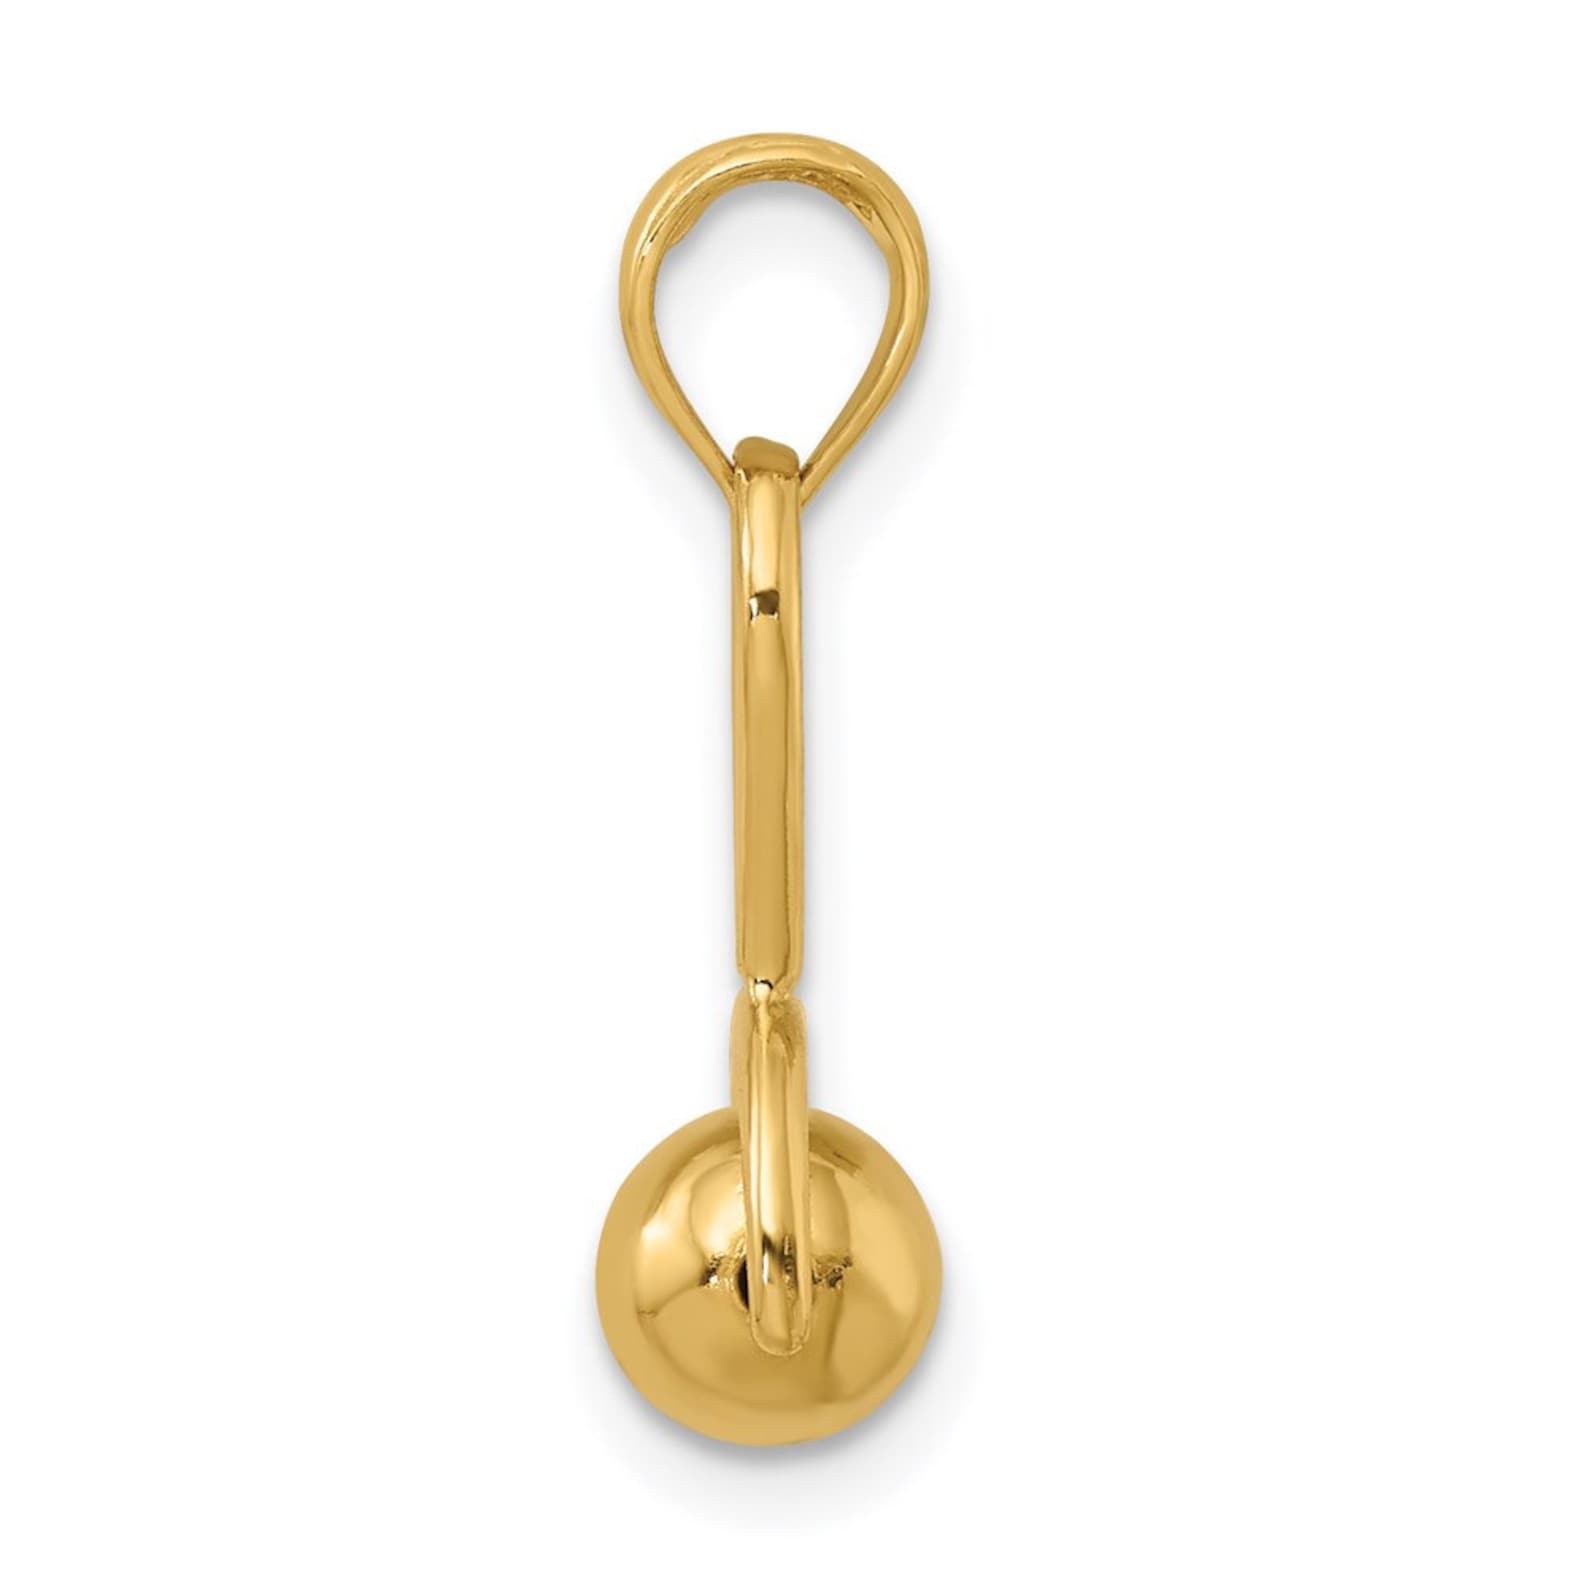 Gold 3D Baby Rattle Pendant with Moveable Ball